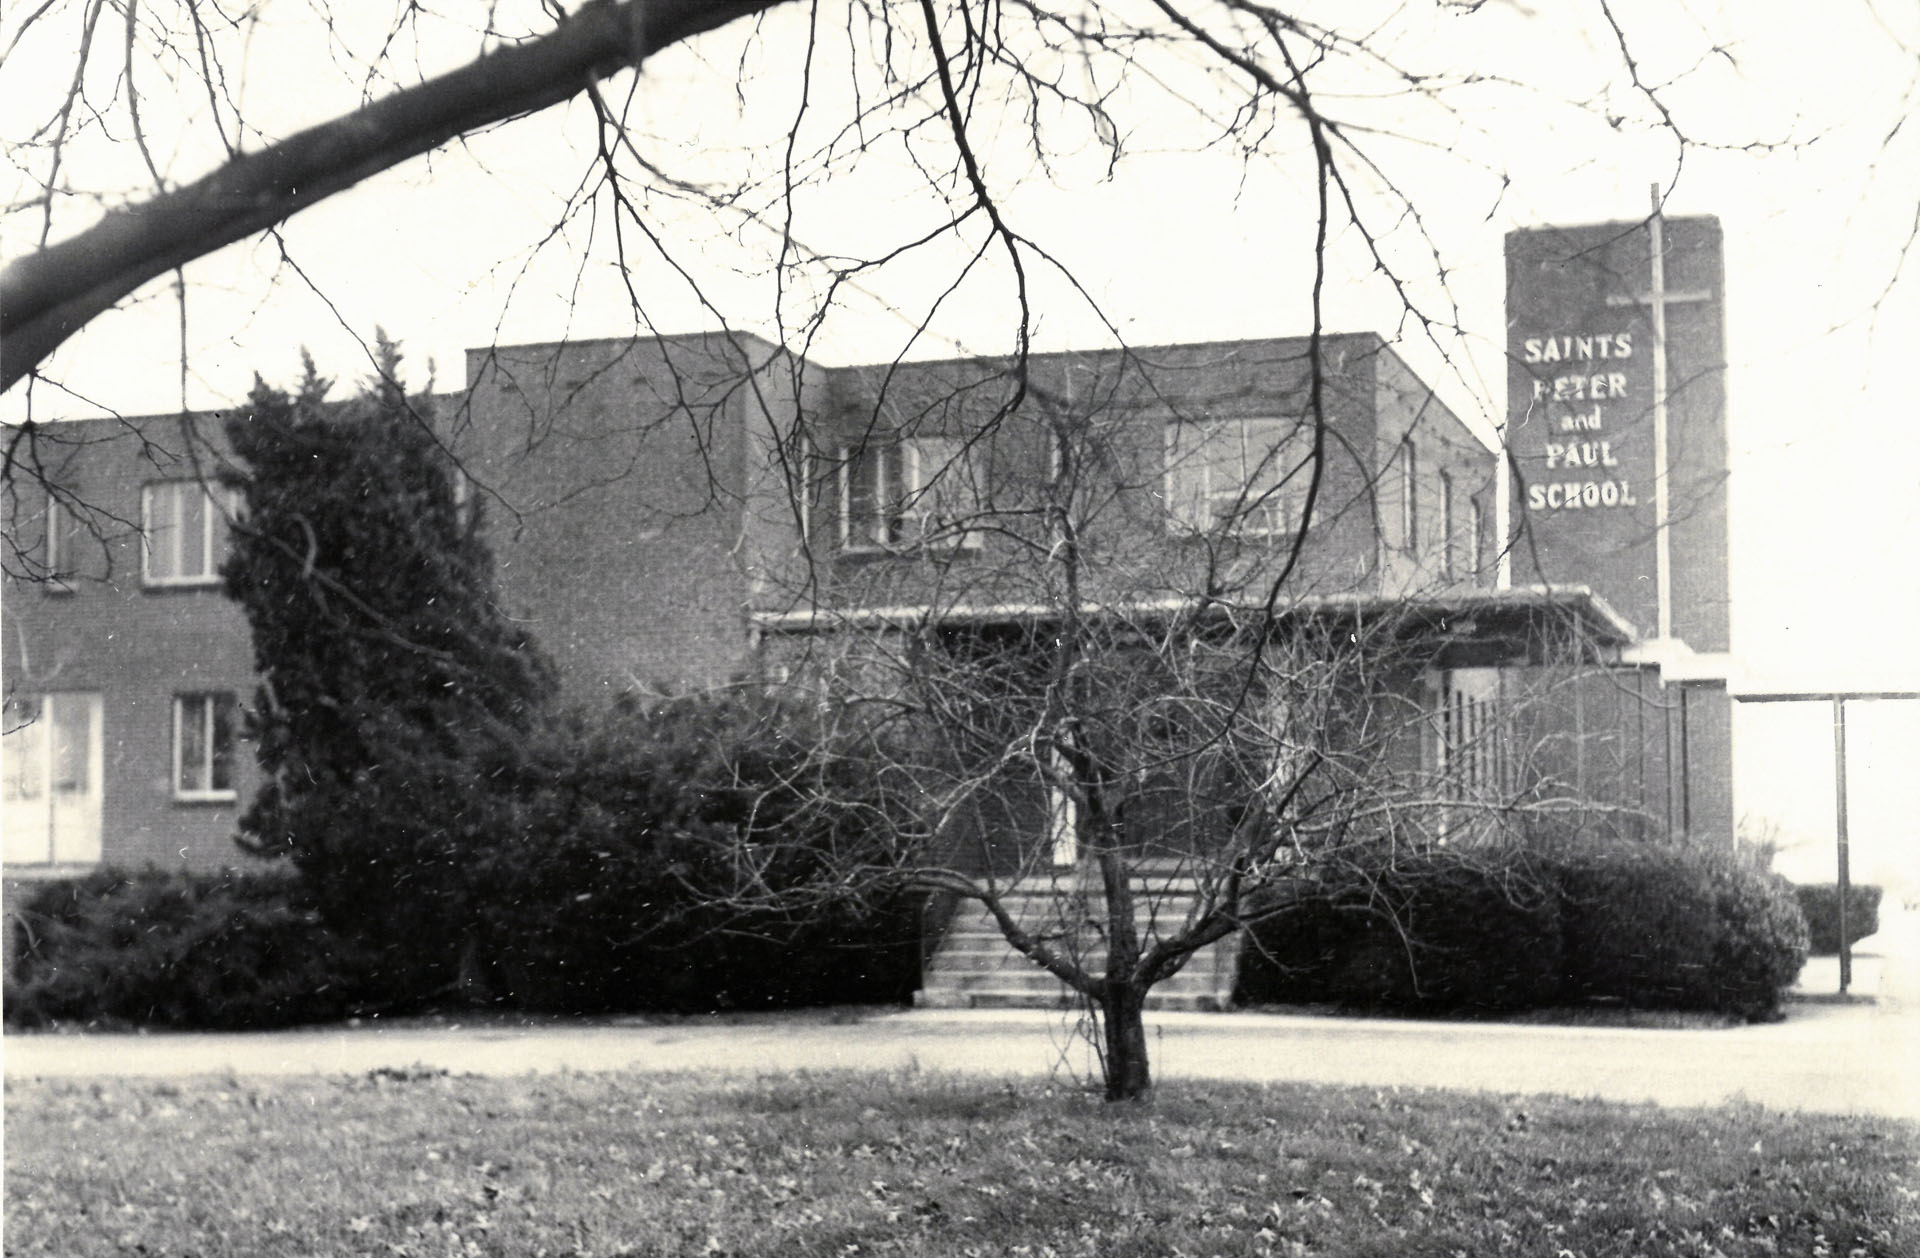 1955 – Sts. Peter and Paul School, Easton, MD